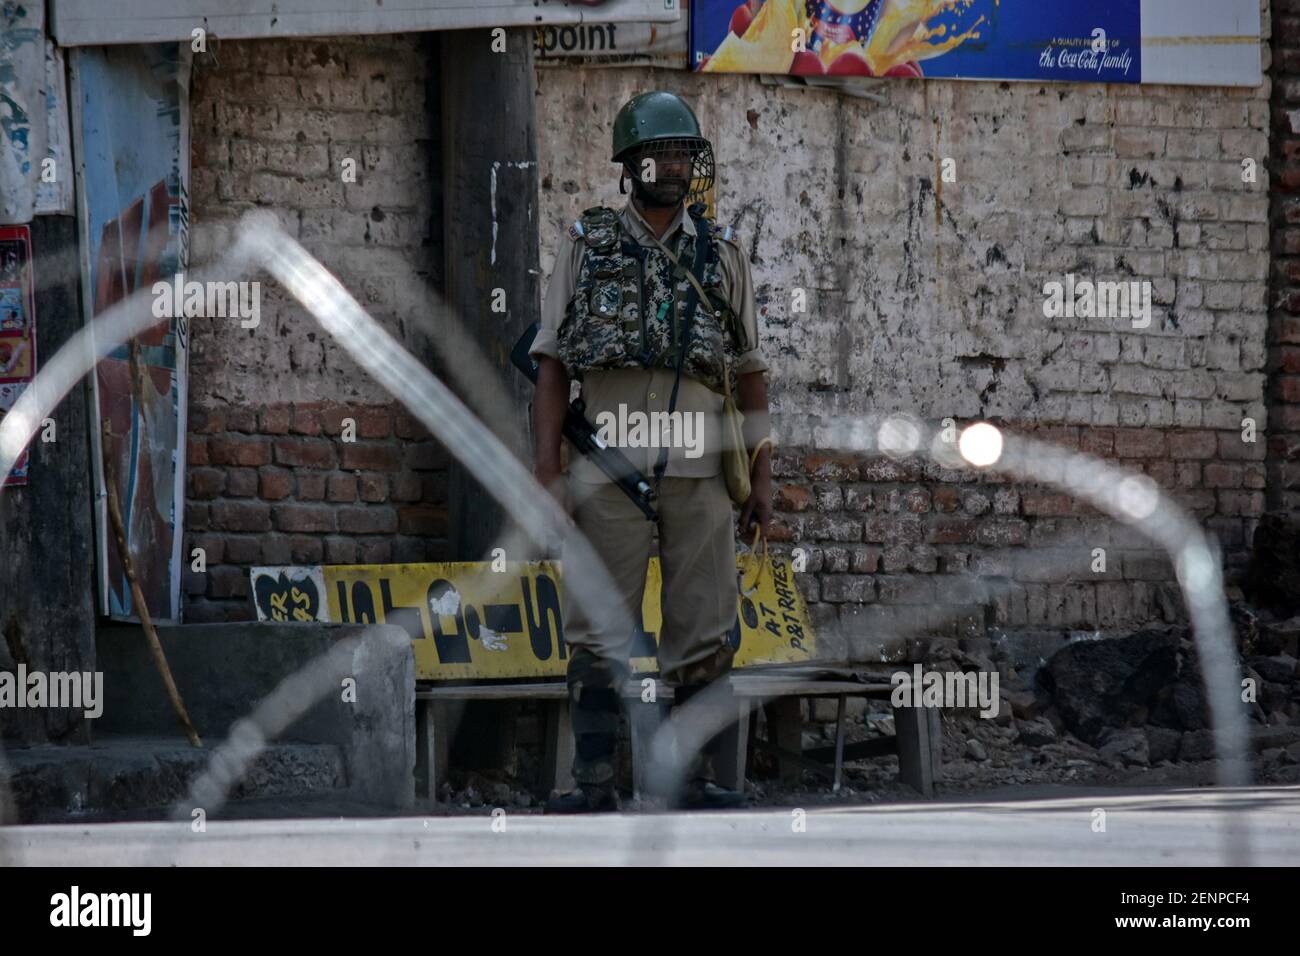 A paramilitary trooper stands guard during shutdown in Srinagar, Kashmir. Kashmir valley remained shut for the 40th consecutive day following the scrapping of Article 370 by the central government which grants special status to Jammu & Kashmir. (Photo by Saqib Majeed / SOPA Images/Sipa USA) Stock Photo